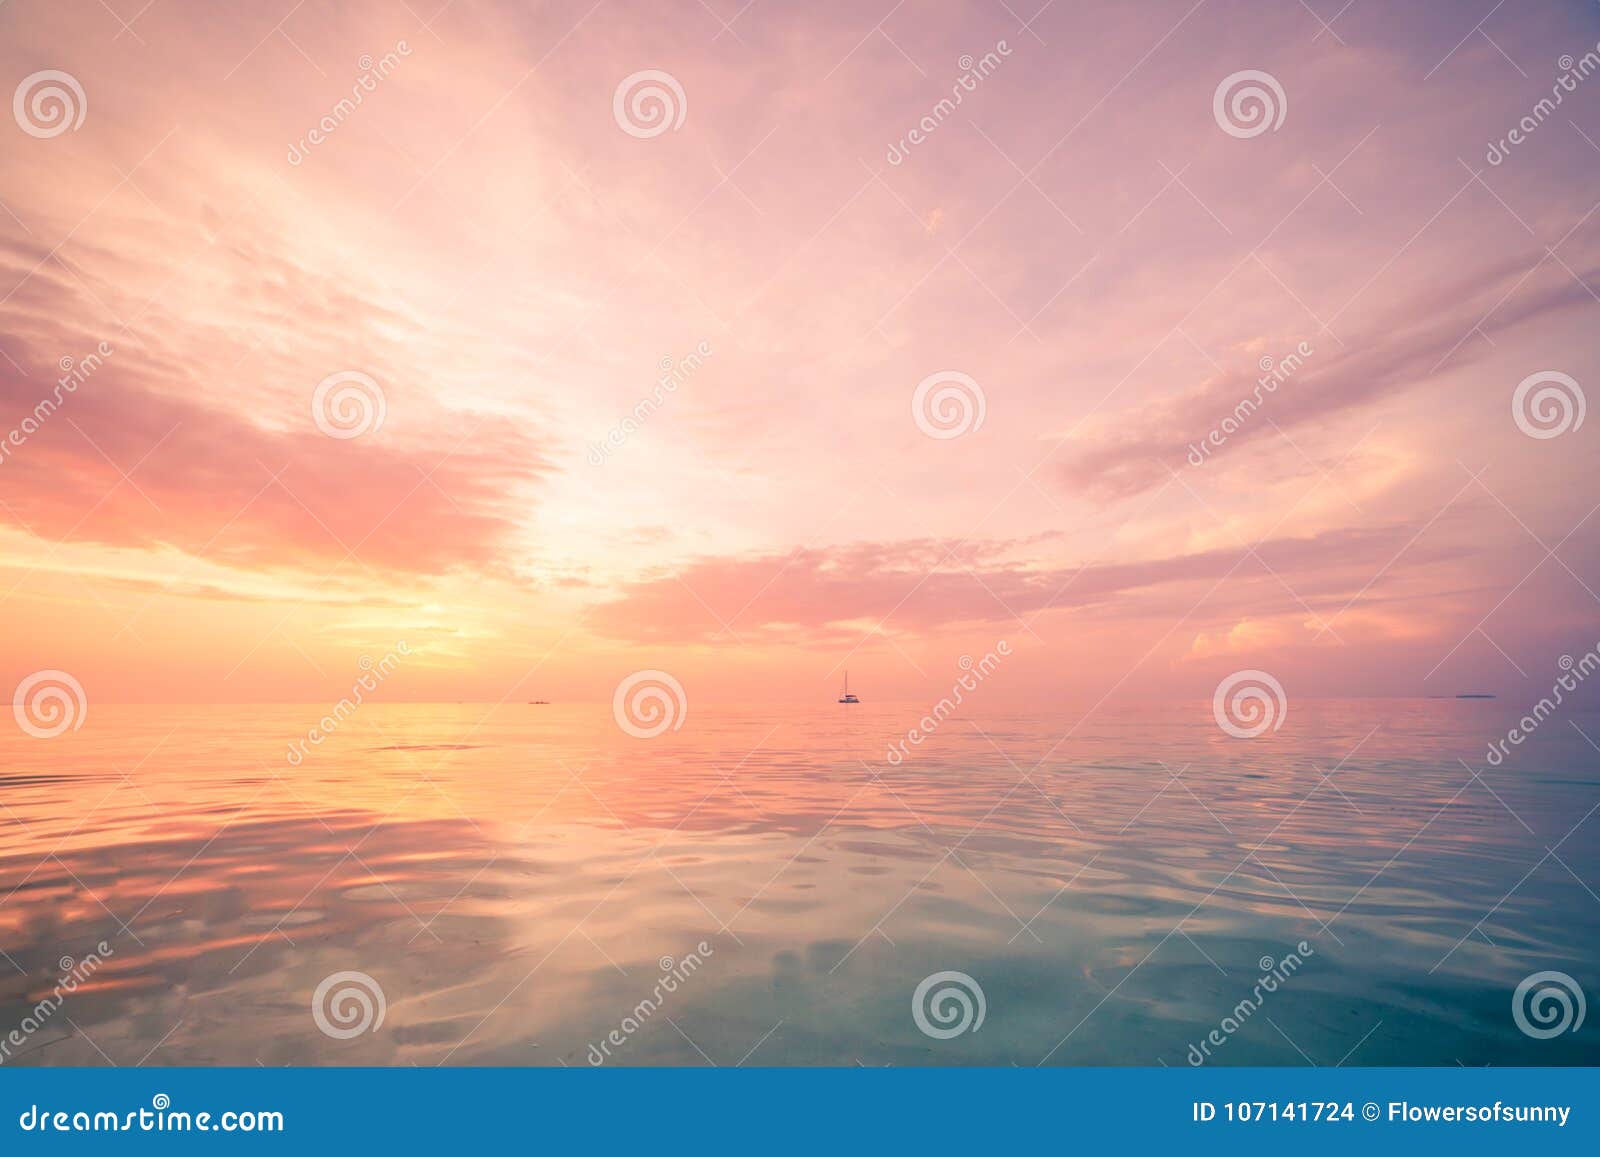 relaxing and calm sea view. open ocean water and sunset sky. tranquil nature background. infinity sea horizon